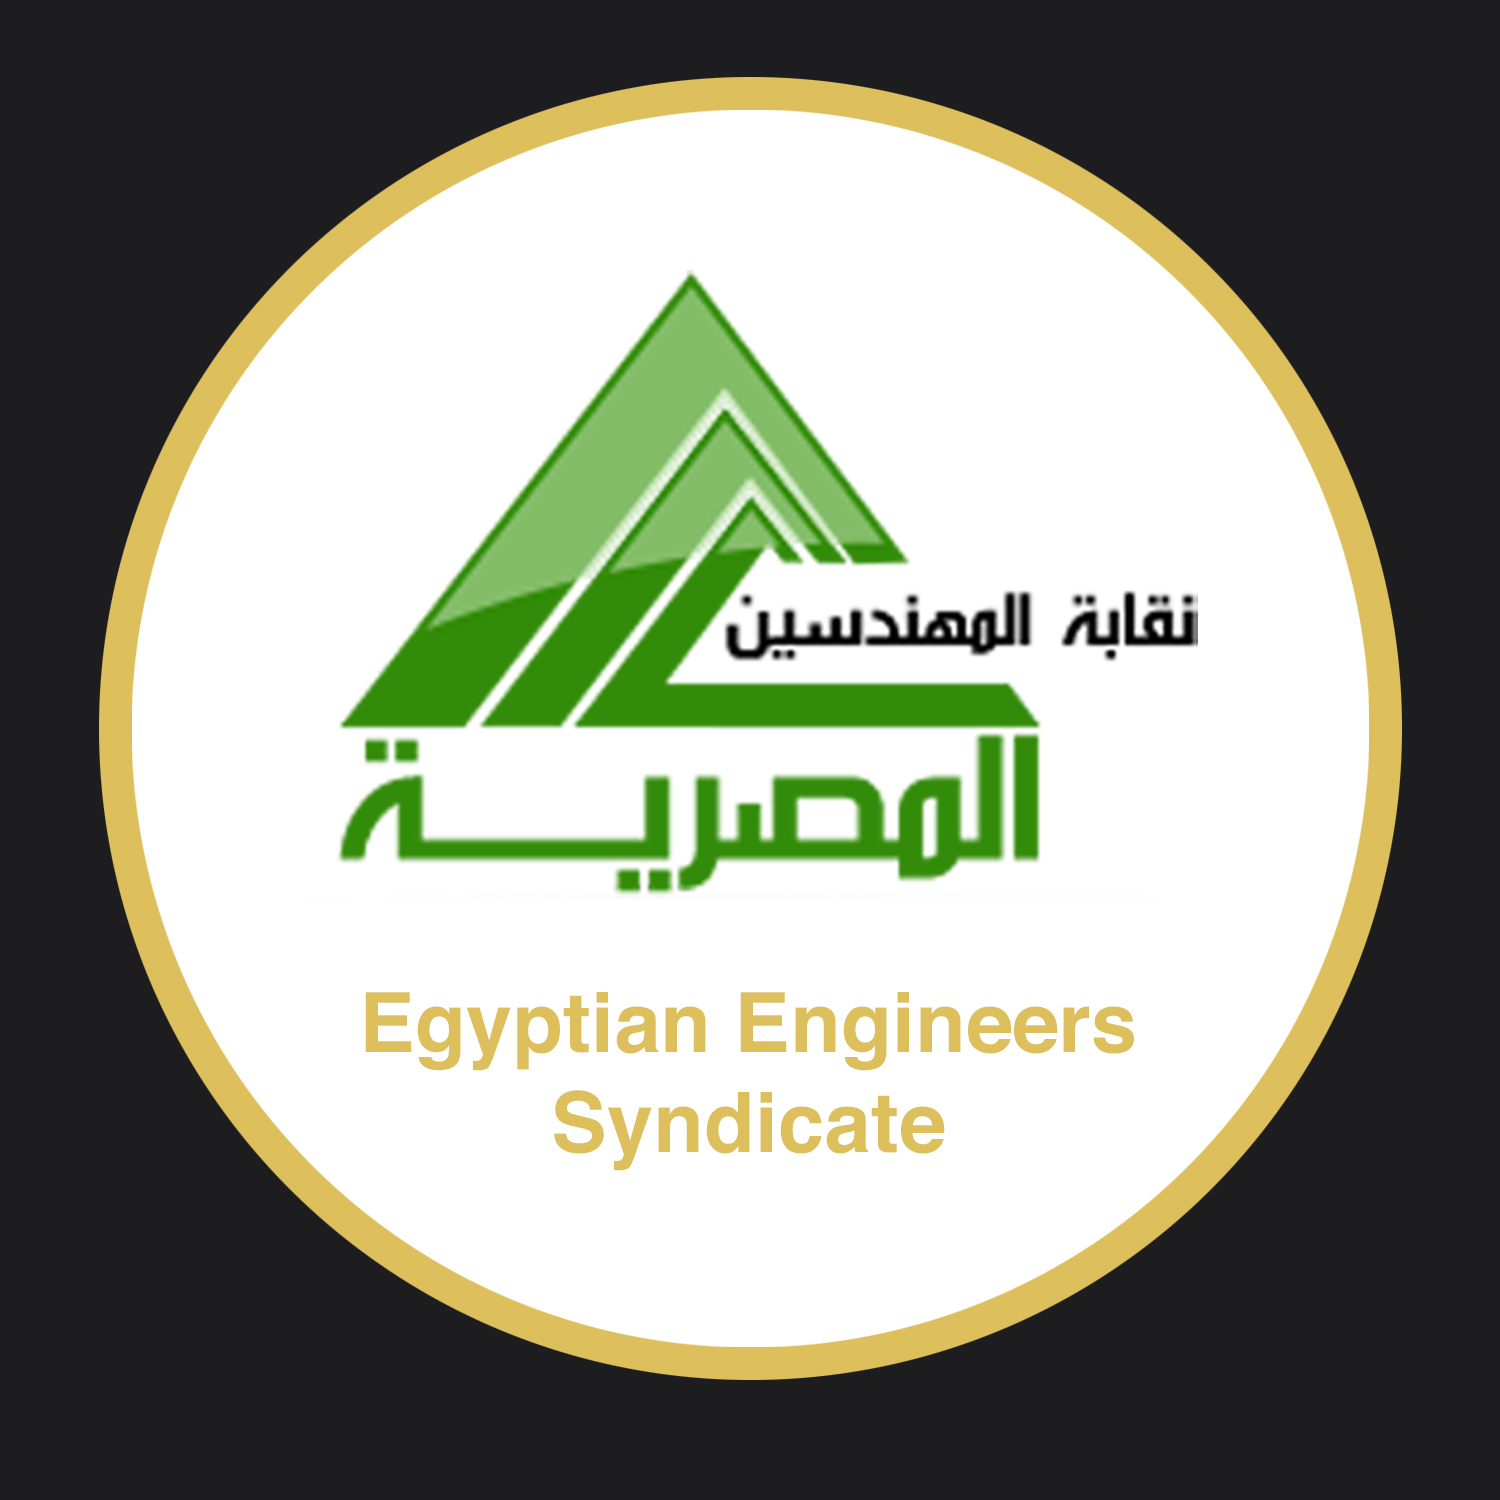 Egyptian Engineers Syndicate